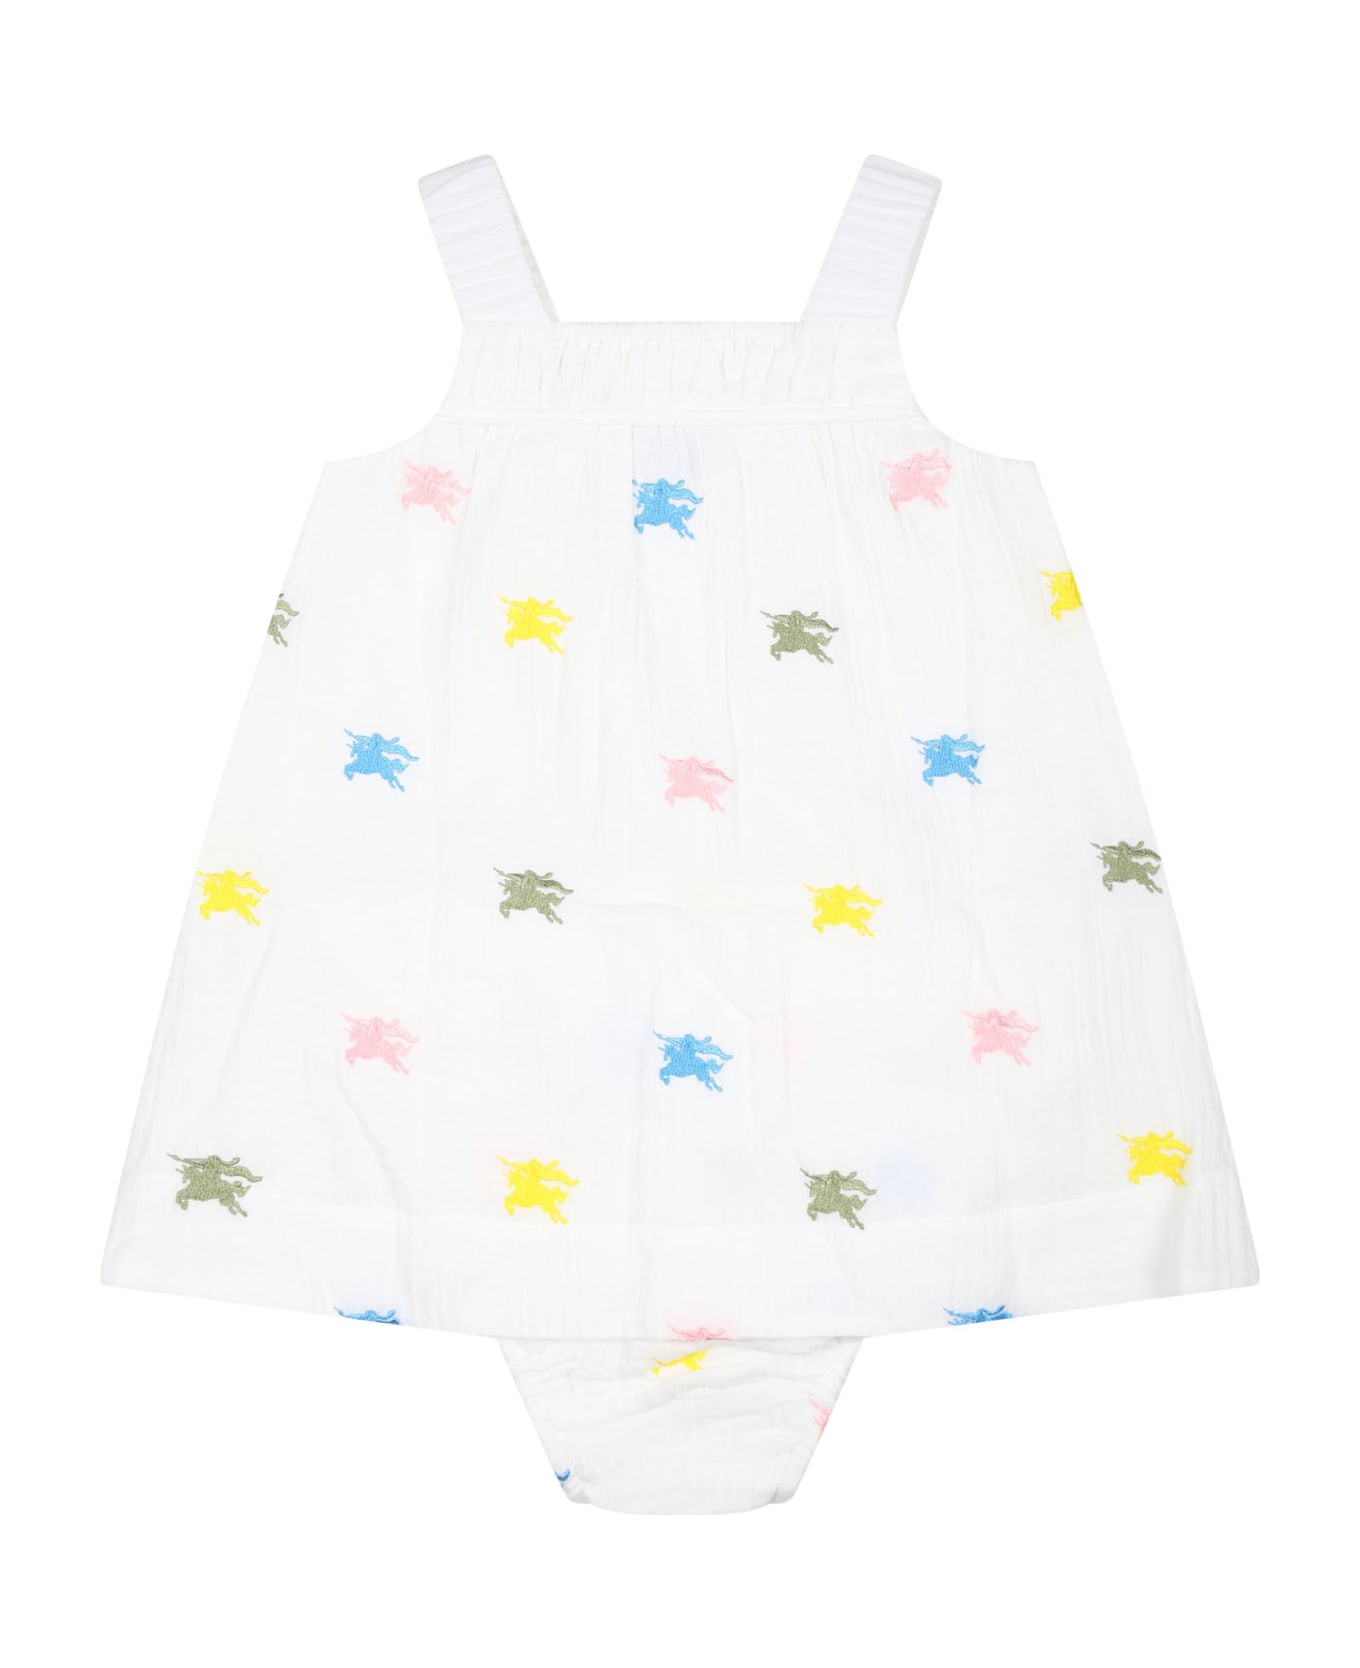 Burberry White Dress For Baby Girl With Embroidery - White